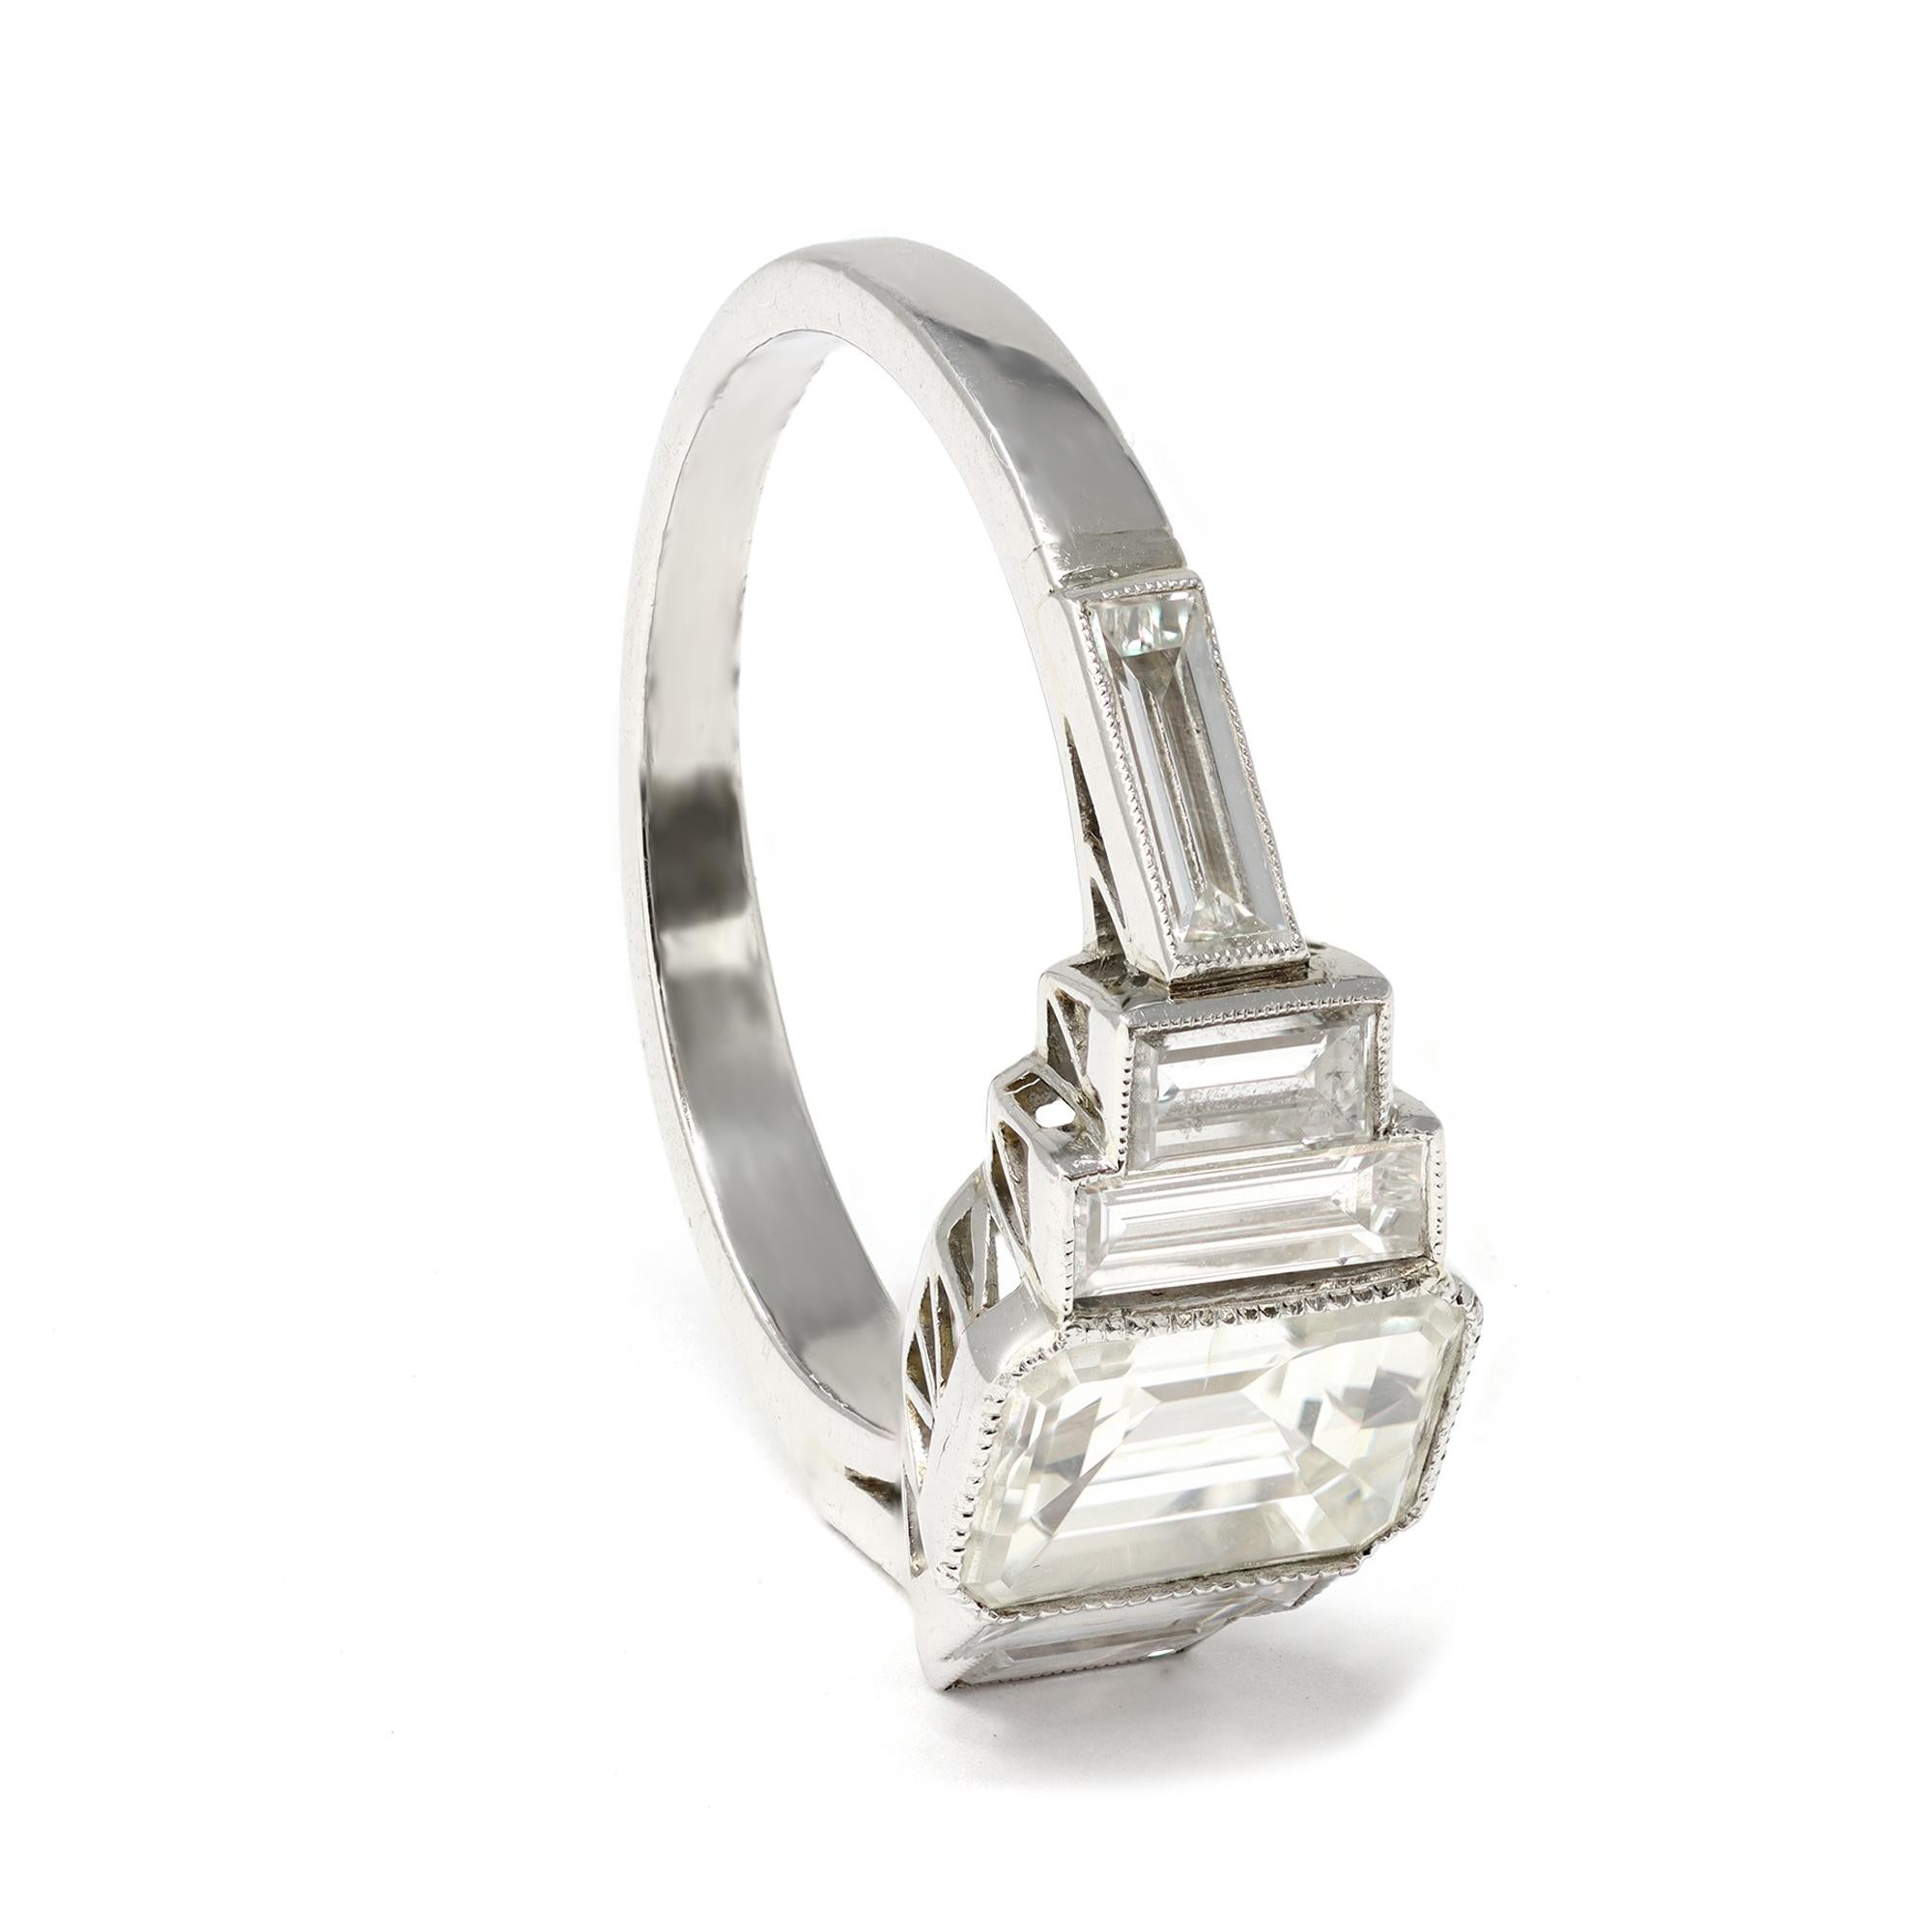 An elegant and classic engagement ring featuring an emerald-cut center diamond weighing 2.02 carats, graded J color and SI1 clarity accompanied by EGL report No US 62649002D. The center diamond is flanked with 6 side baguette diamonds of H color and